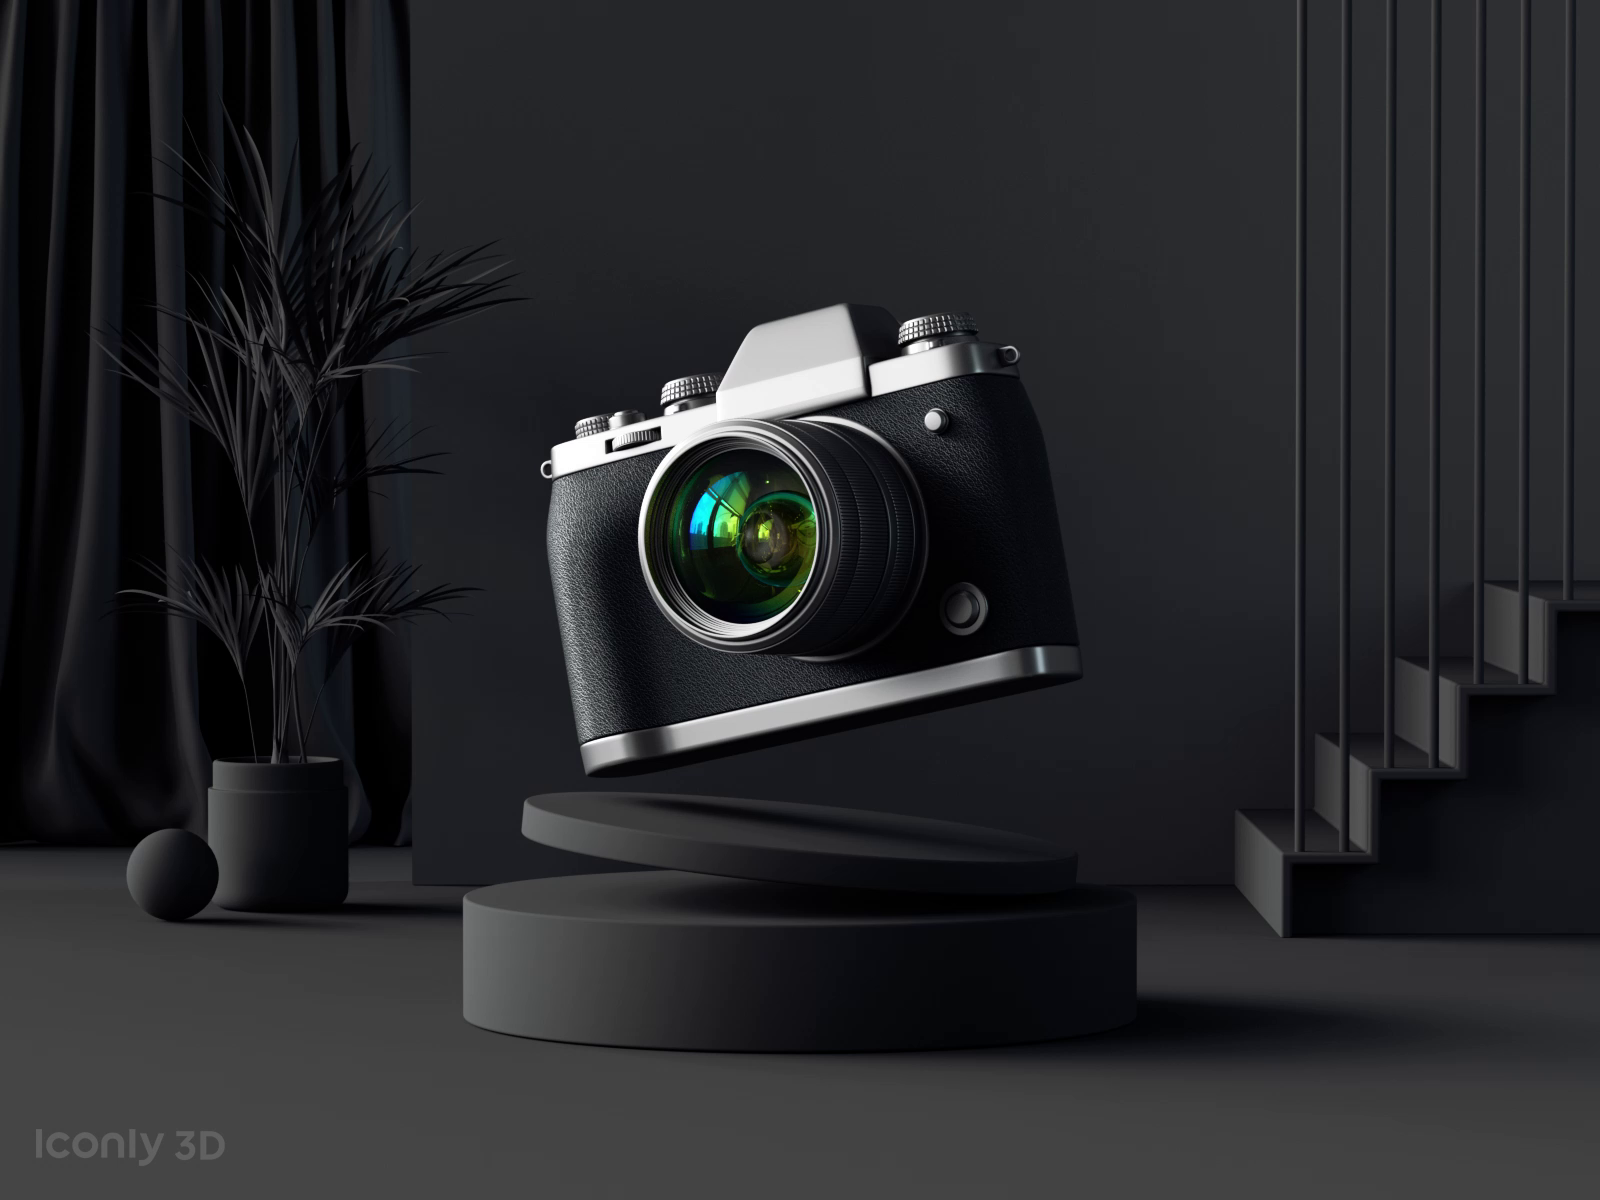 Iconly 3D | Camera icon by Reza Gholipour for Piqo Design on Dribbble